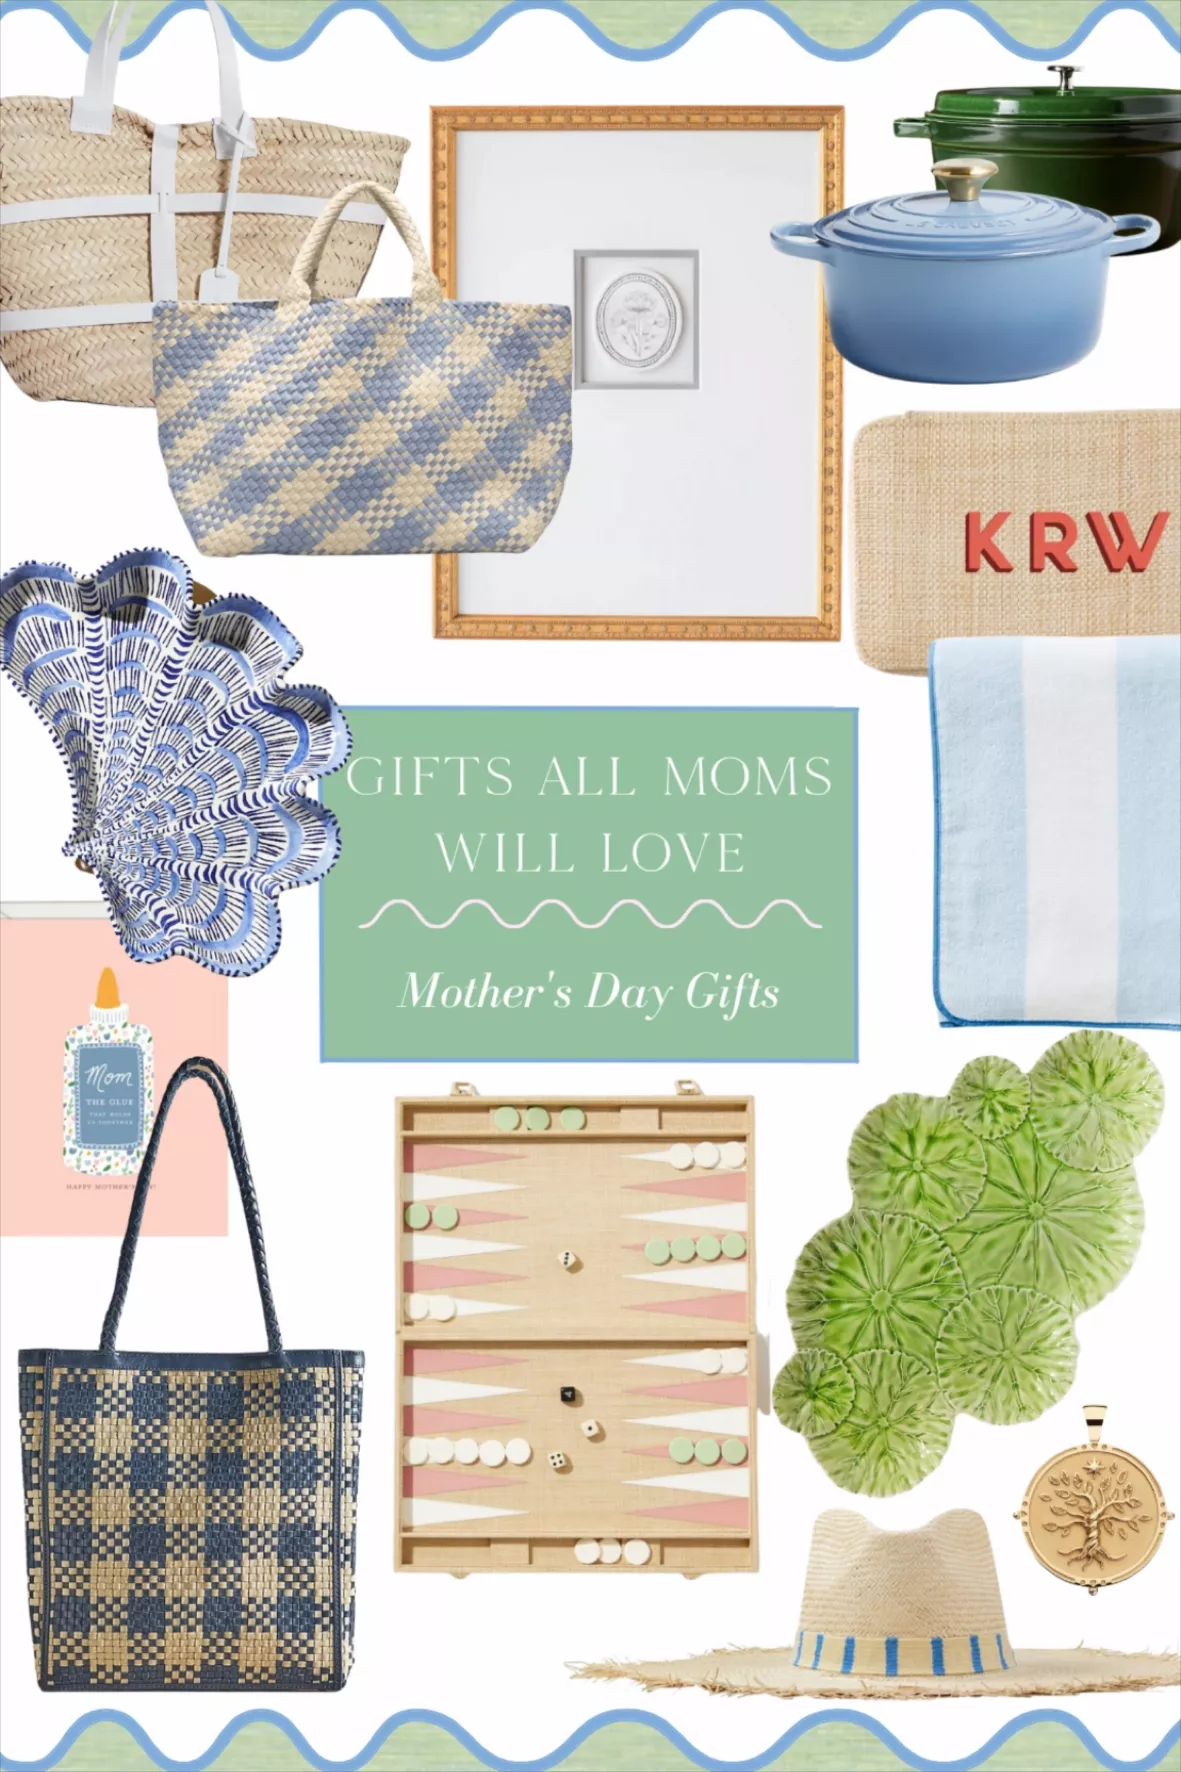 The Mother's Day Gift Guide for every type of Mum